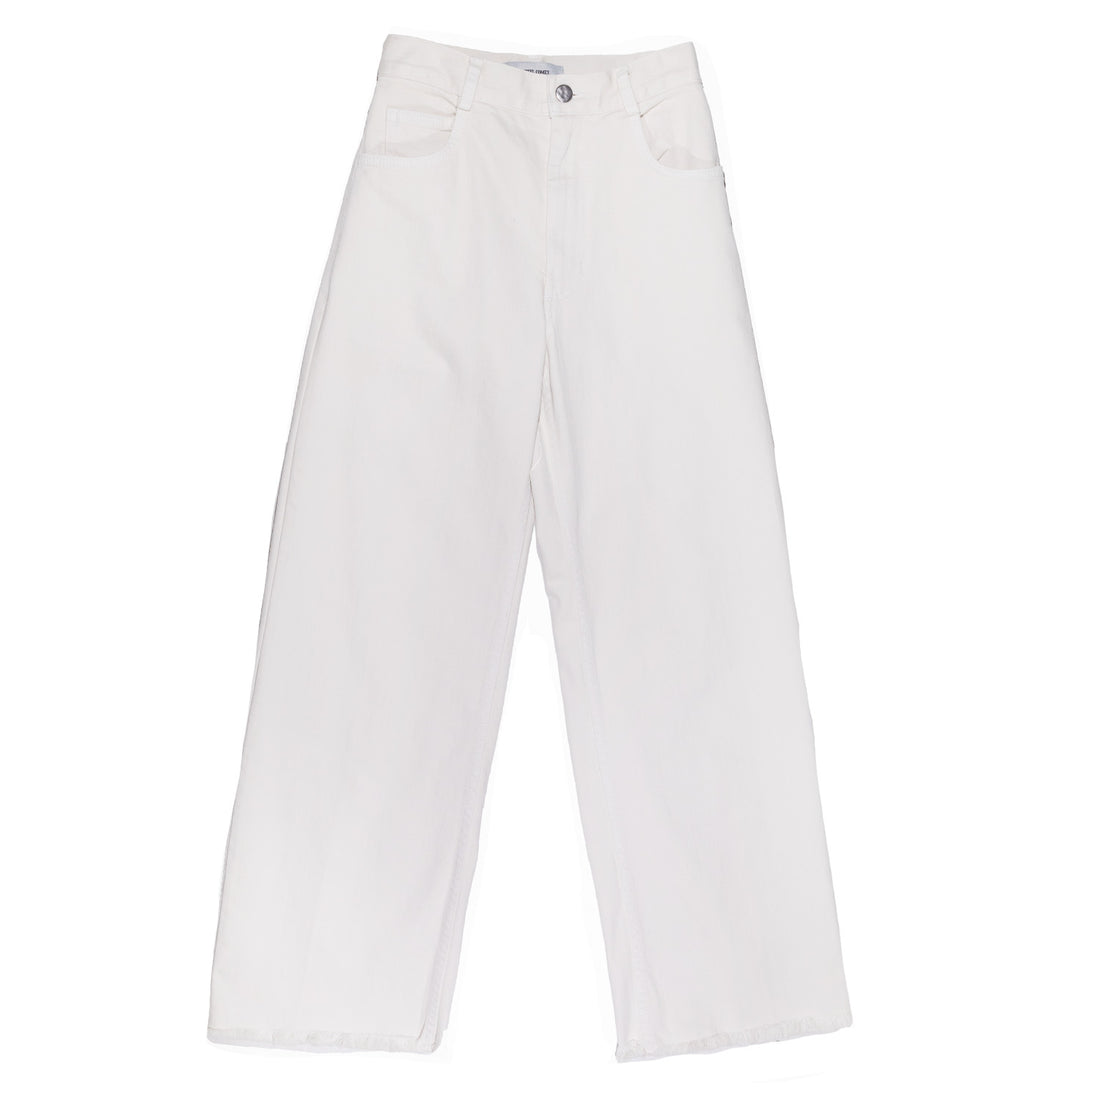 Rachel Comey Puerto Pant in Dirty White